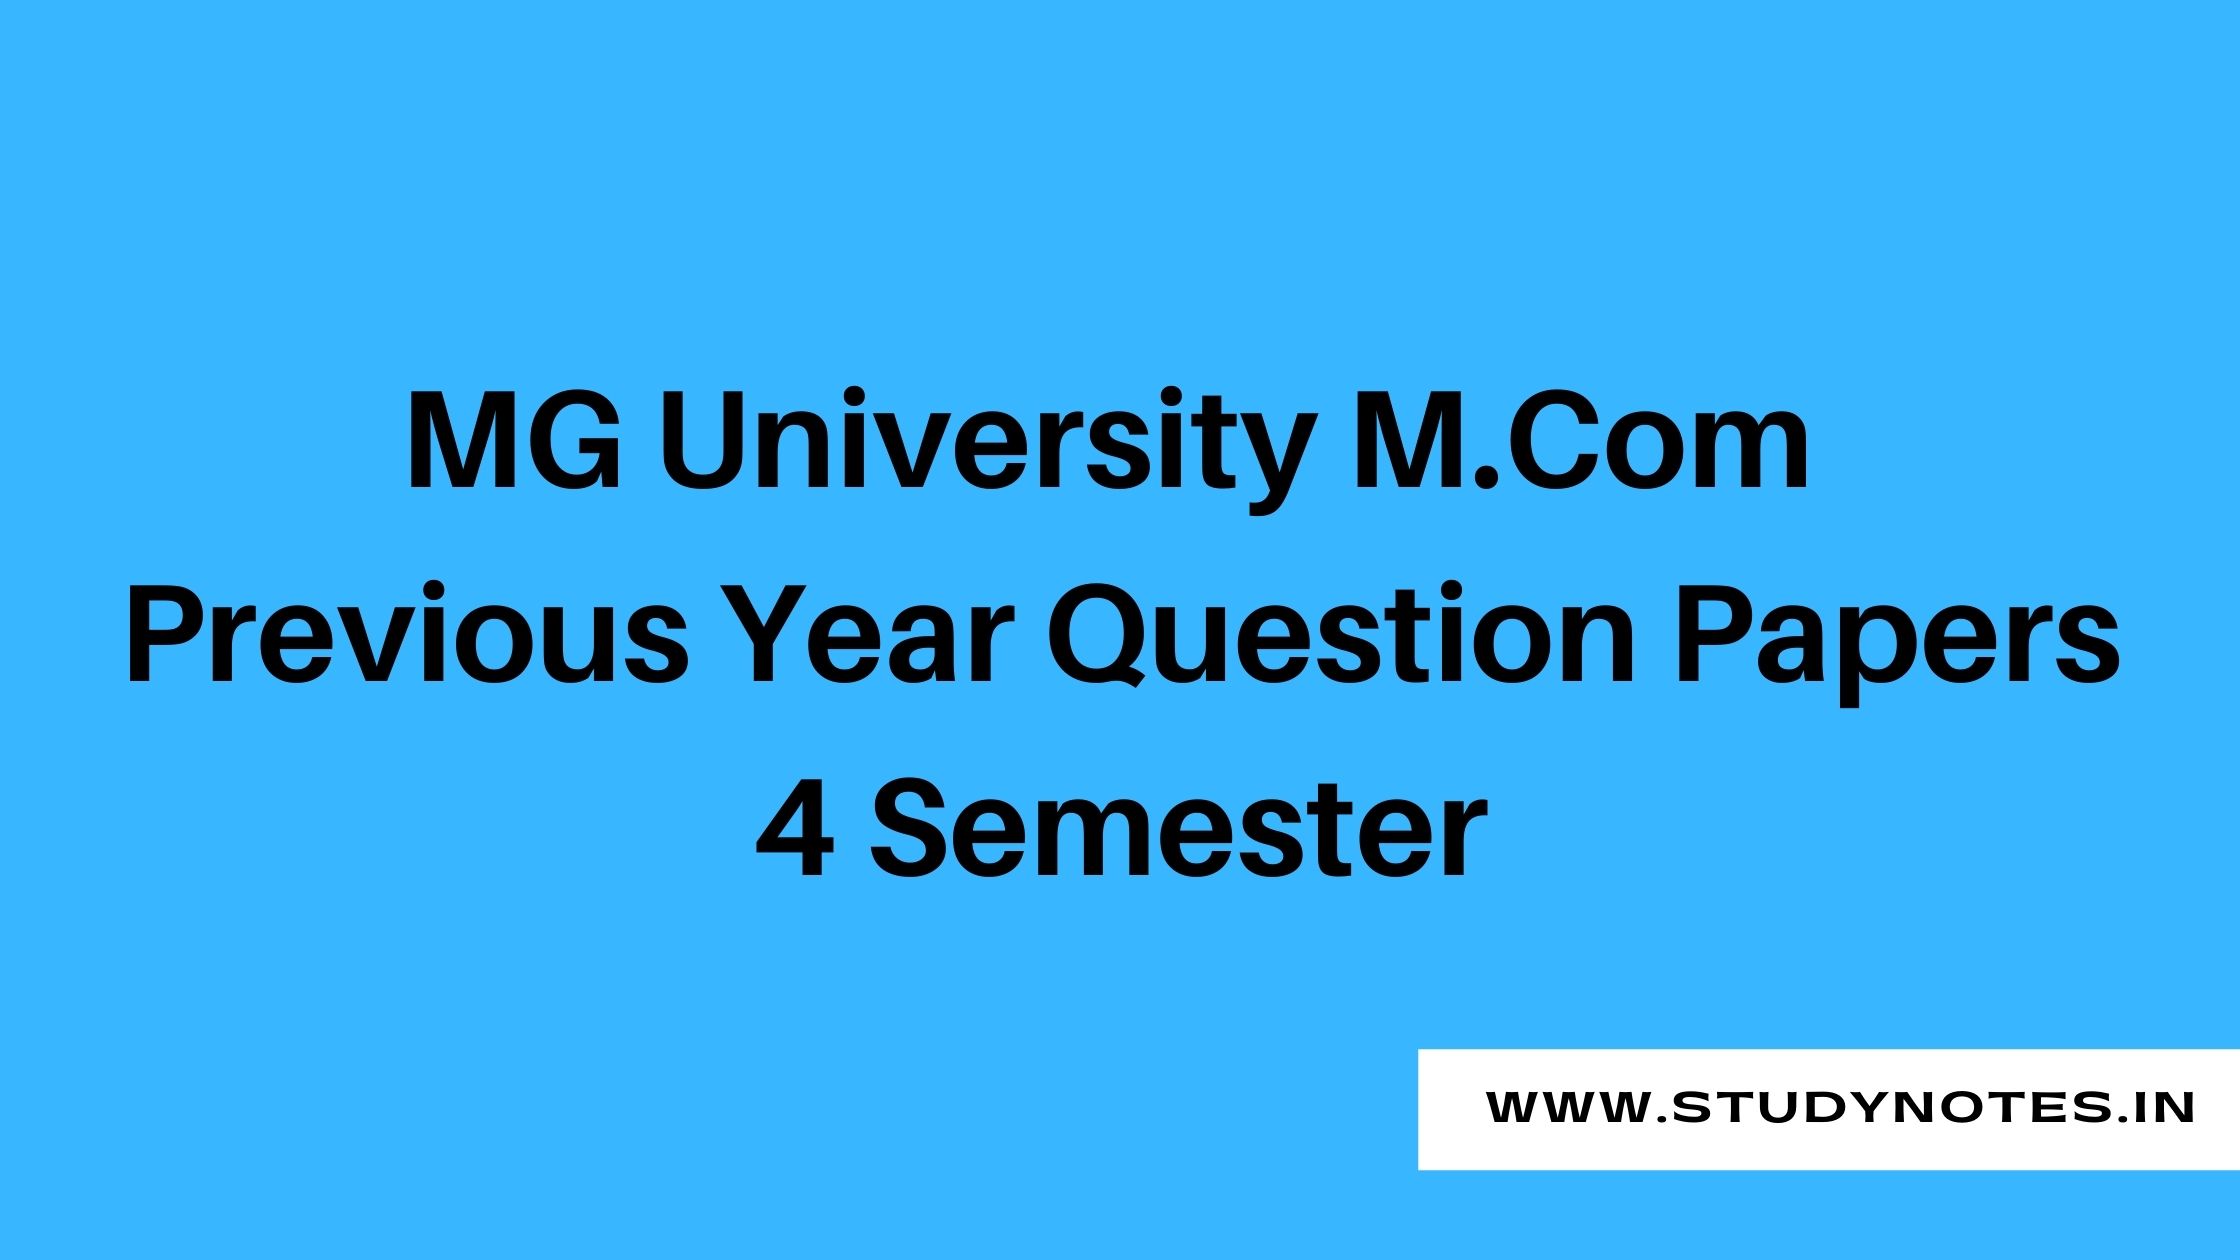 M.Com Fourth Semester Previous Question Paper of MG University